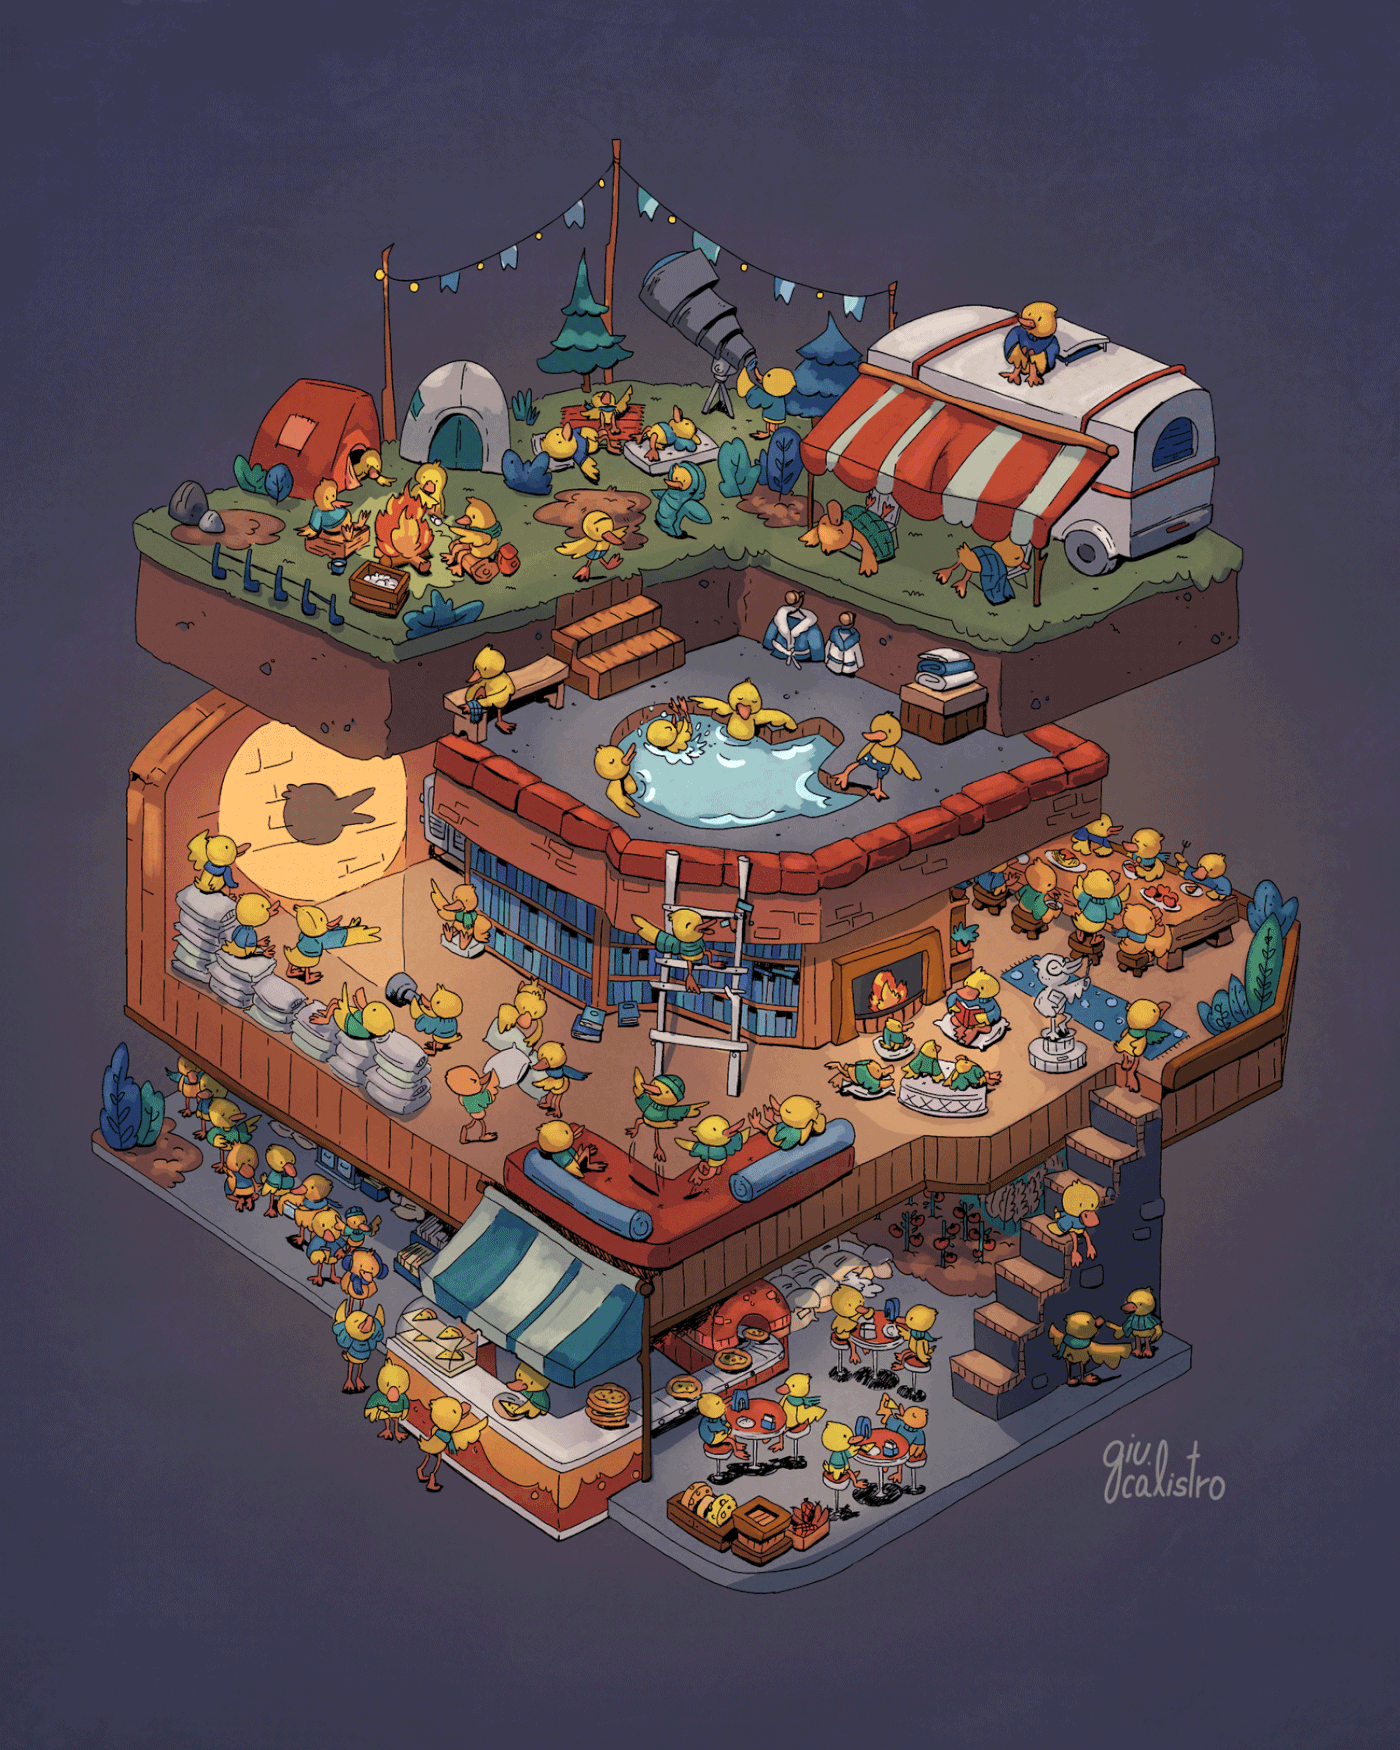 Isometric intricate Wimmelbild Diorama 2D ILLUSTRATION  Game Art cozy Playful Tiny